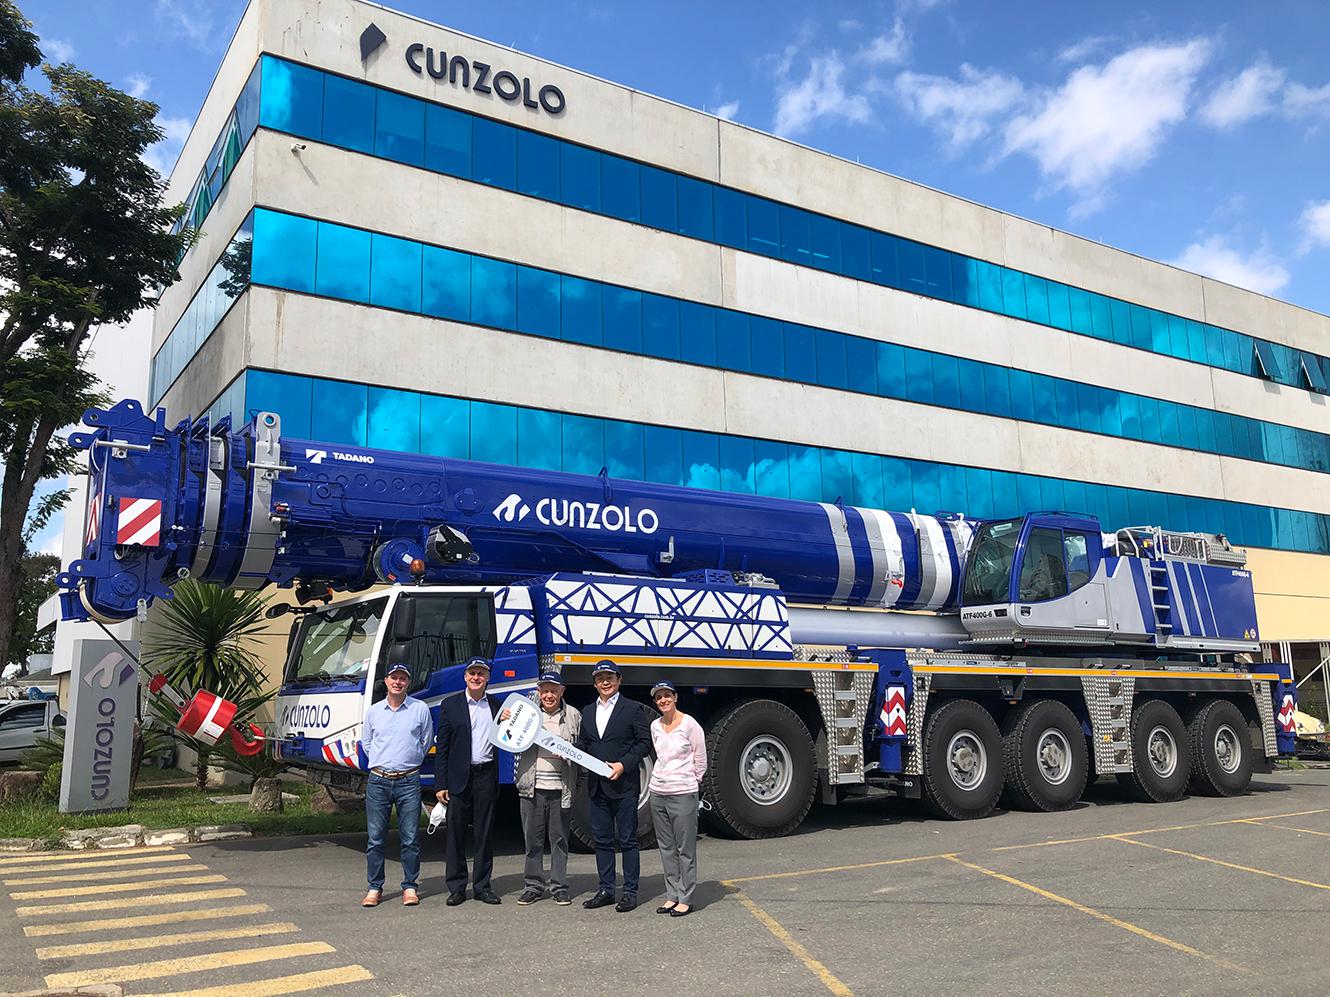 From left to right: Marcos Cunzolo (General Director, Cunzolo) - Anilton Leite (Sales Manager, Tadano Brazil) - Rodolfo Cunzolo (President, Cunzolo) - Masatoshi Hirano (President, Tadano Brazil) - Renata Cunzolo (Financial Director, Cunzolo).